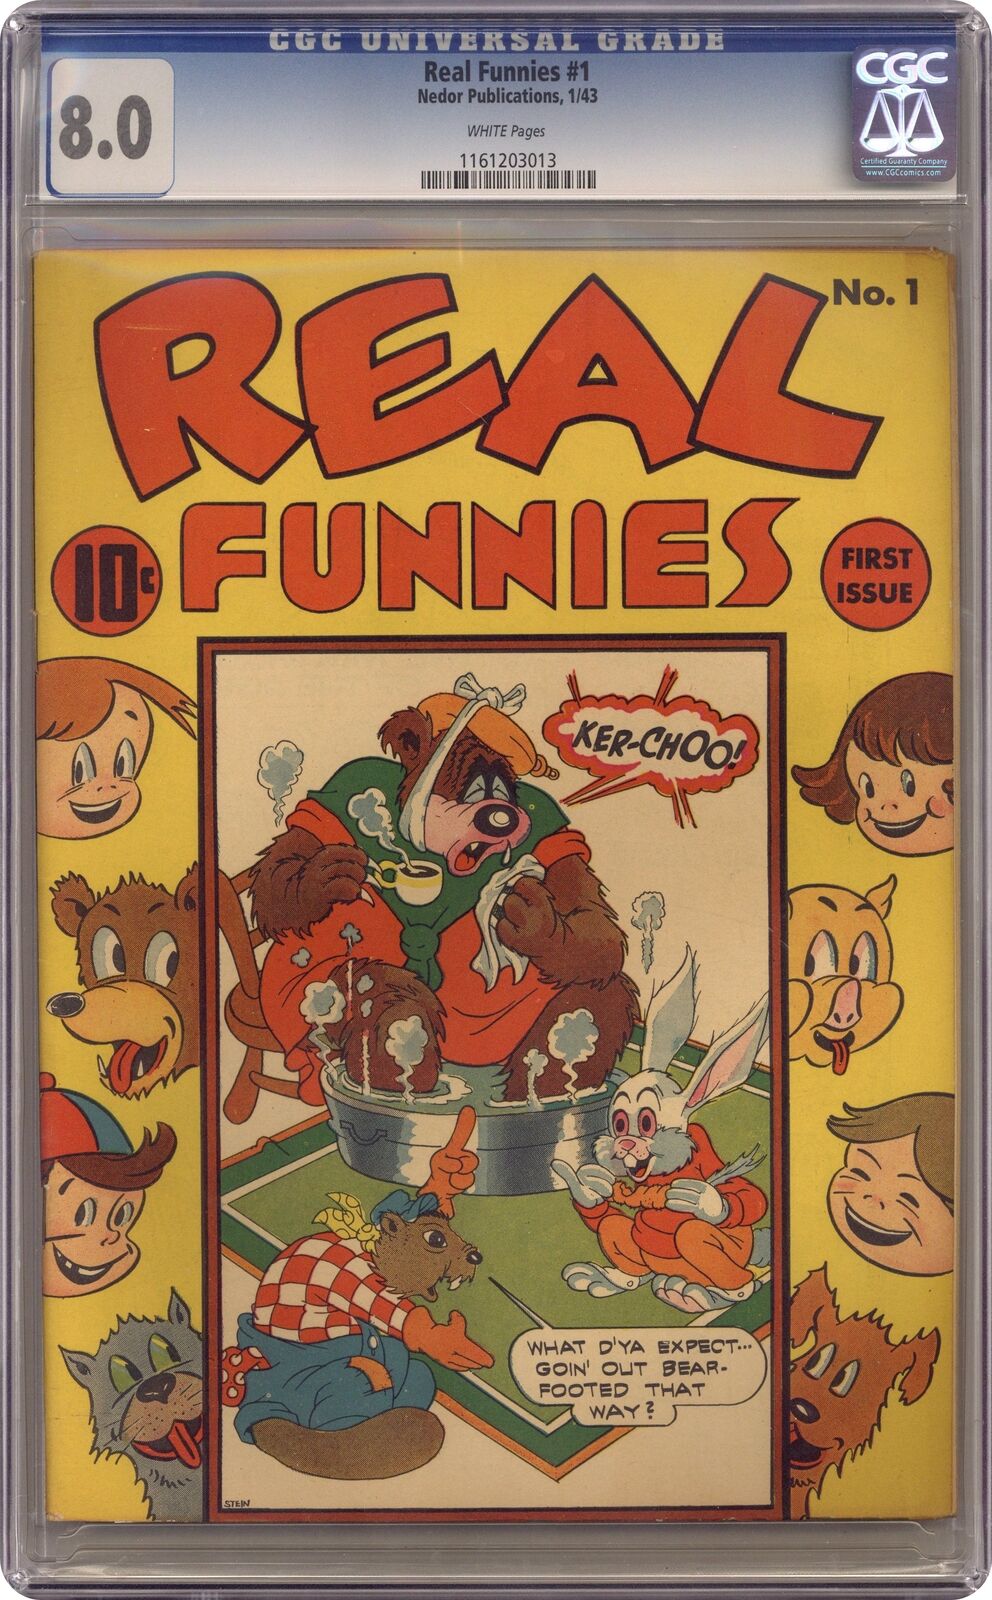 Real Funnies #1 CGC 8.0 1943 1161203013